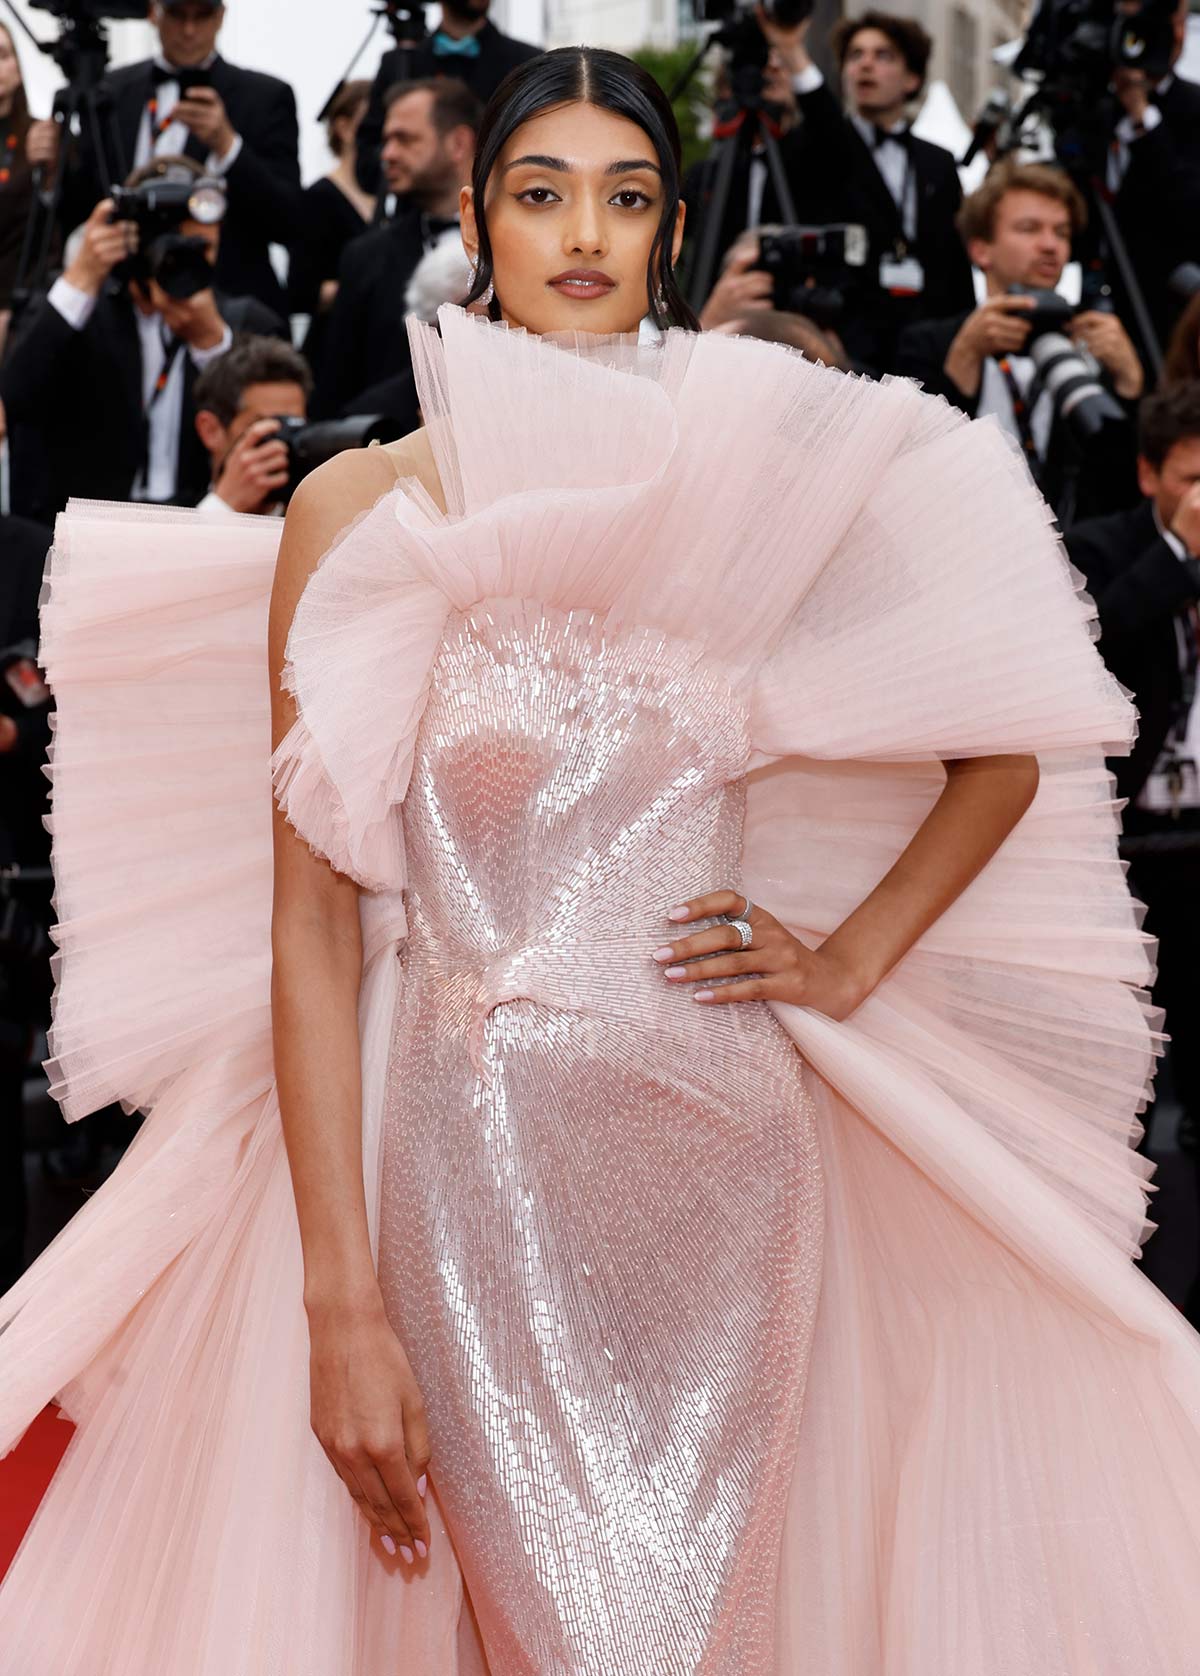 Was She The Only Indian Model At Cannes?